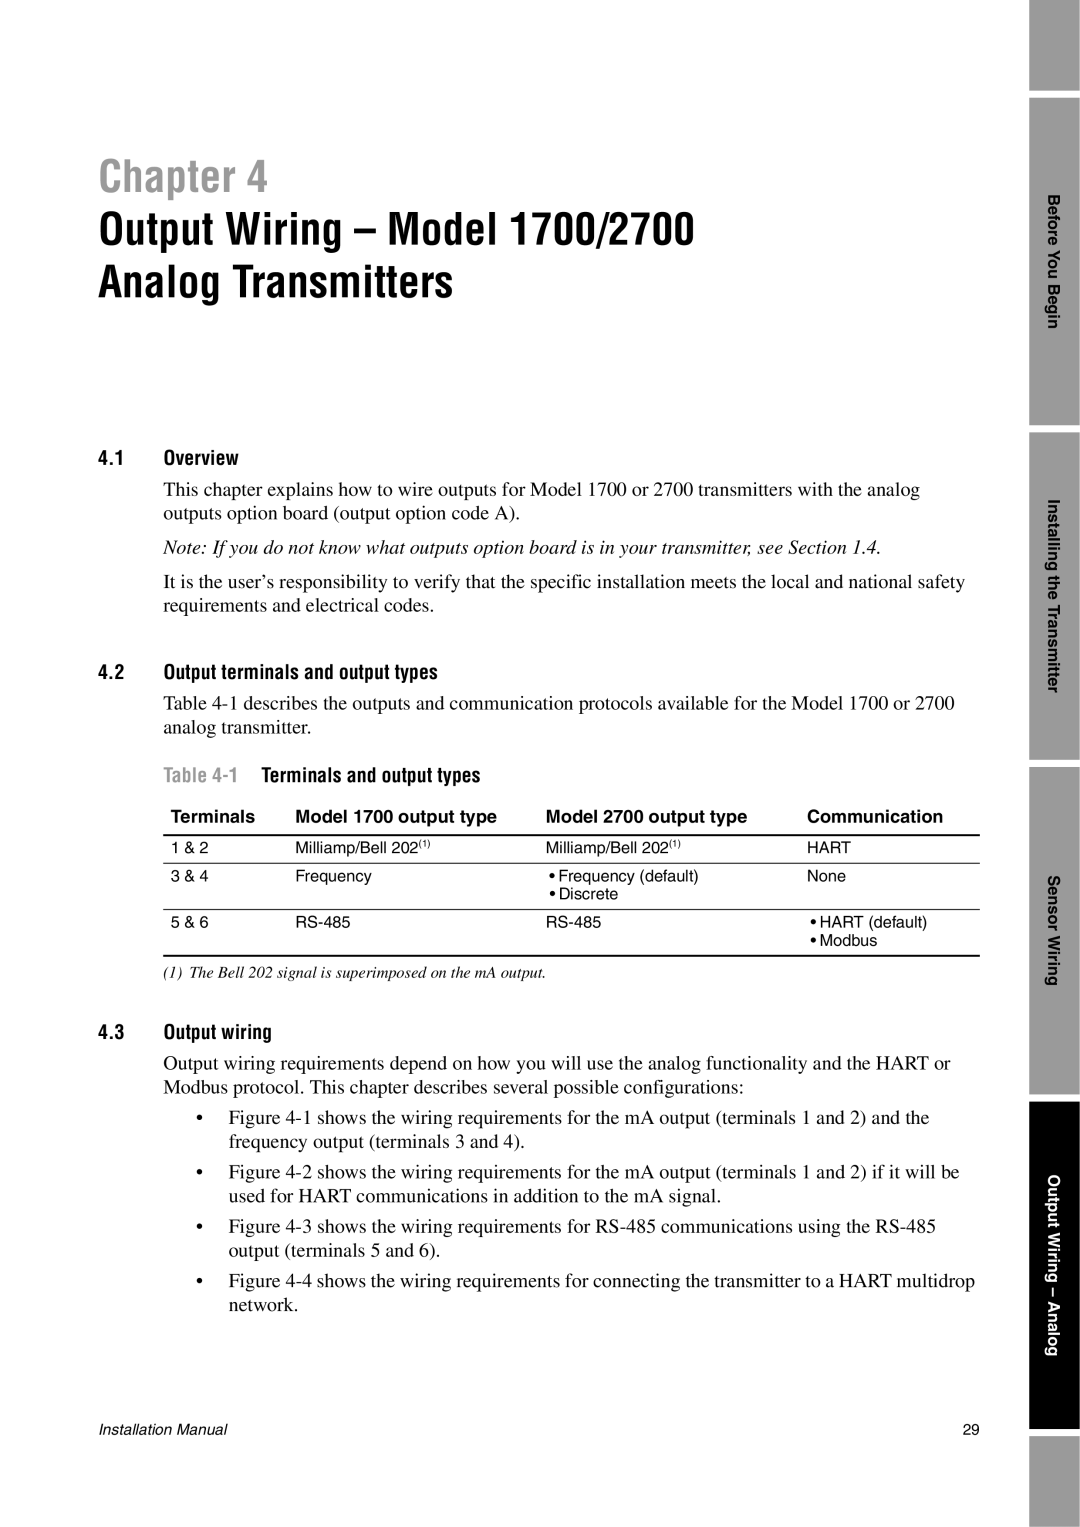 Emerson Output Wiring - Model 1700/2700, Analog Transmitters, Chapter, 4.1Overview, 1 Terminals and output types 